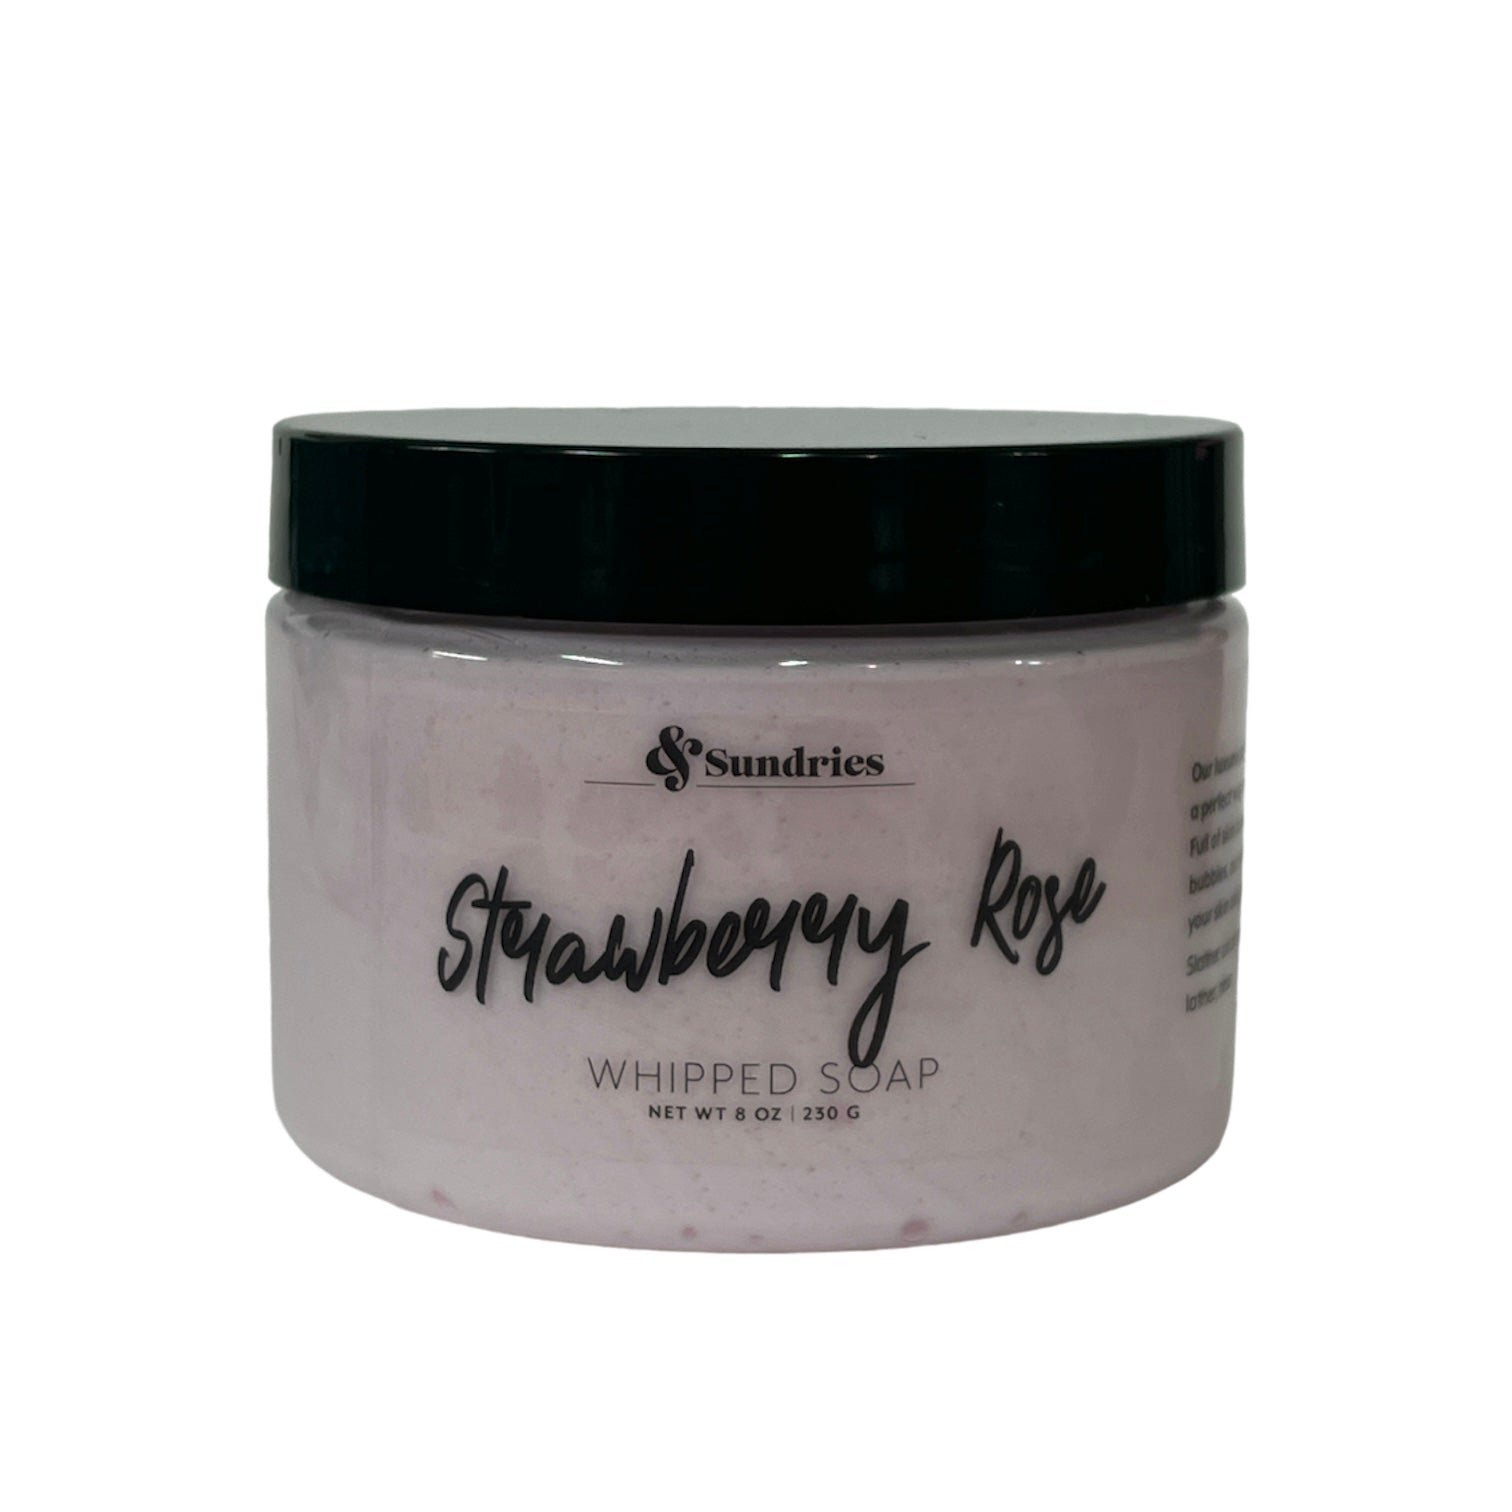 Strawberry Rose Whipped Soap